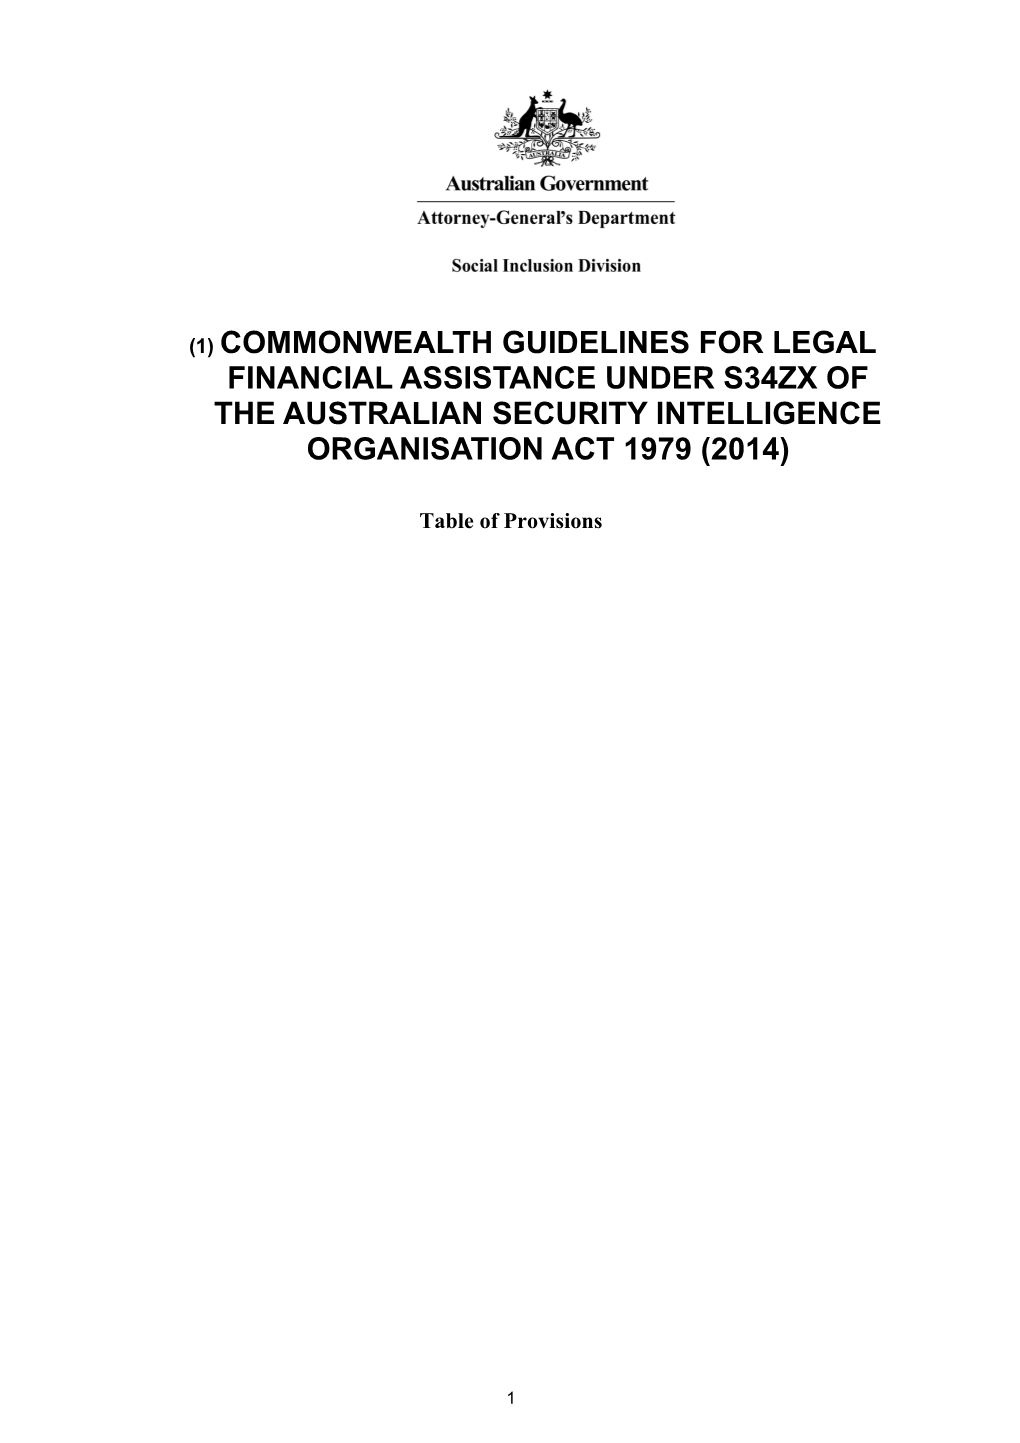 Commonwealth Guidelines for Legal Financial Assistance Under S34zx of the Australian Security